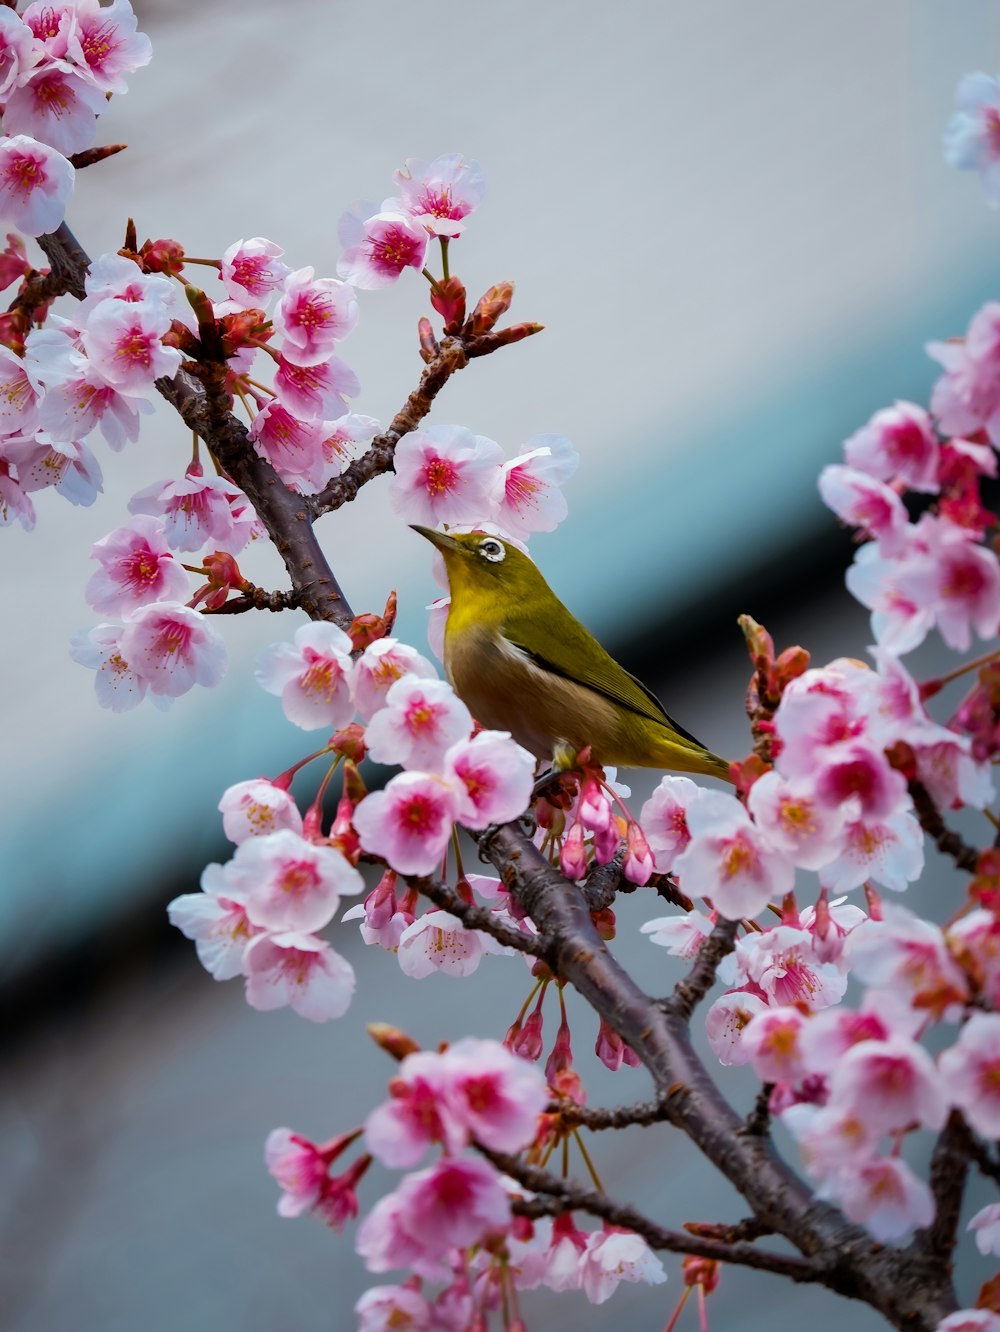 a small yellow bird sitting on a branch of a flowering tree